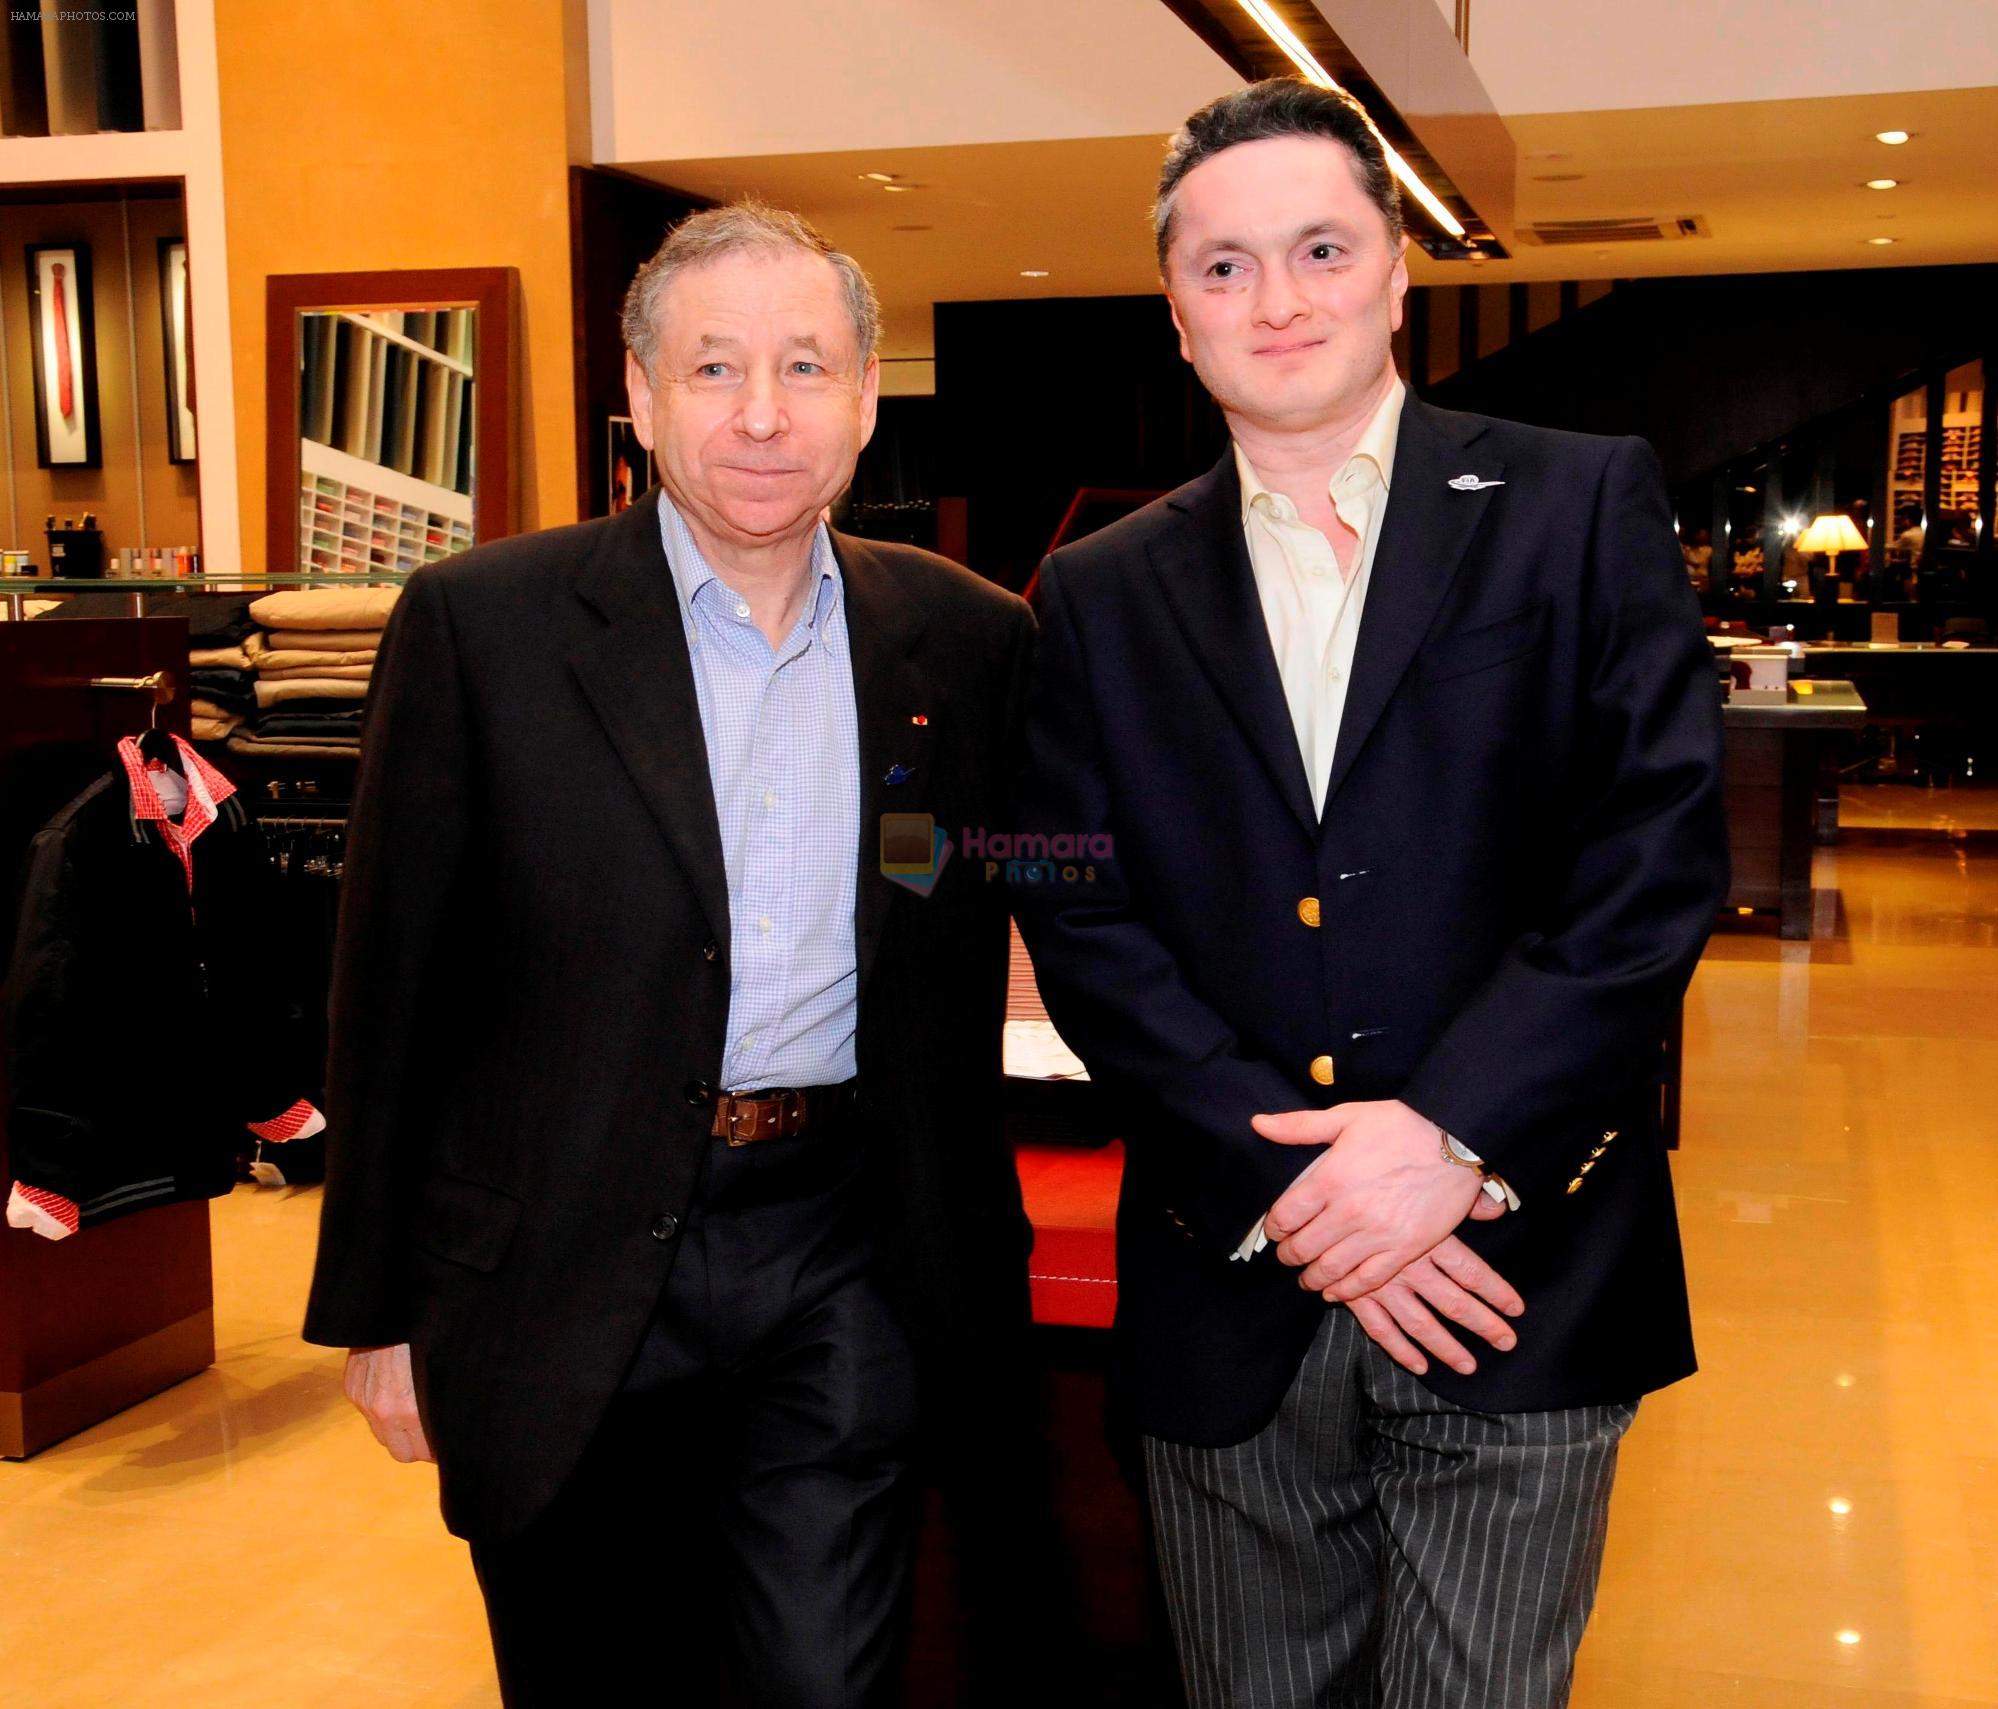 Mr Singhania and Mr Todt at The Raymond Shop3